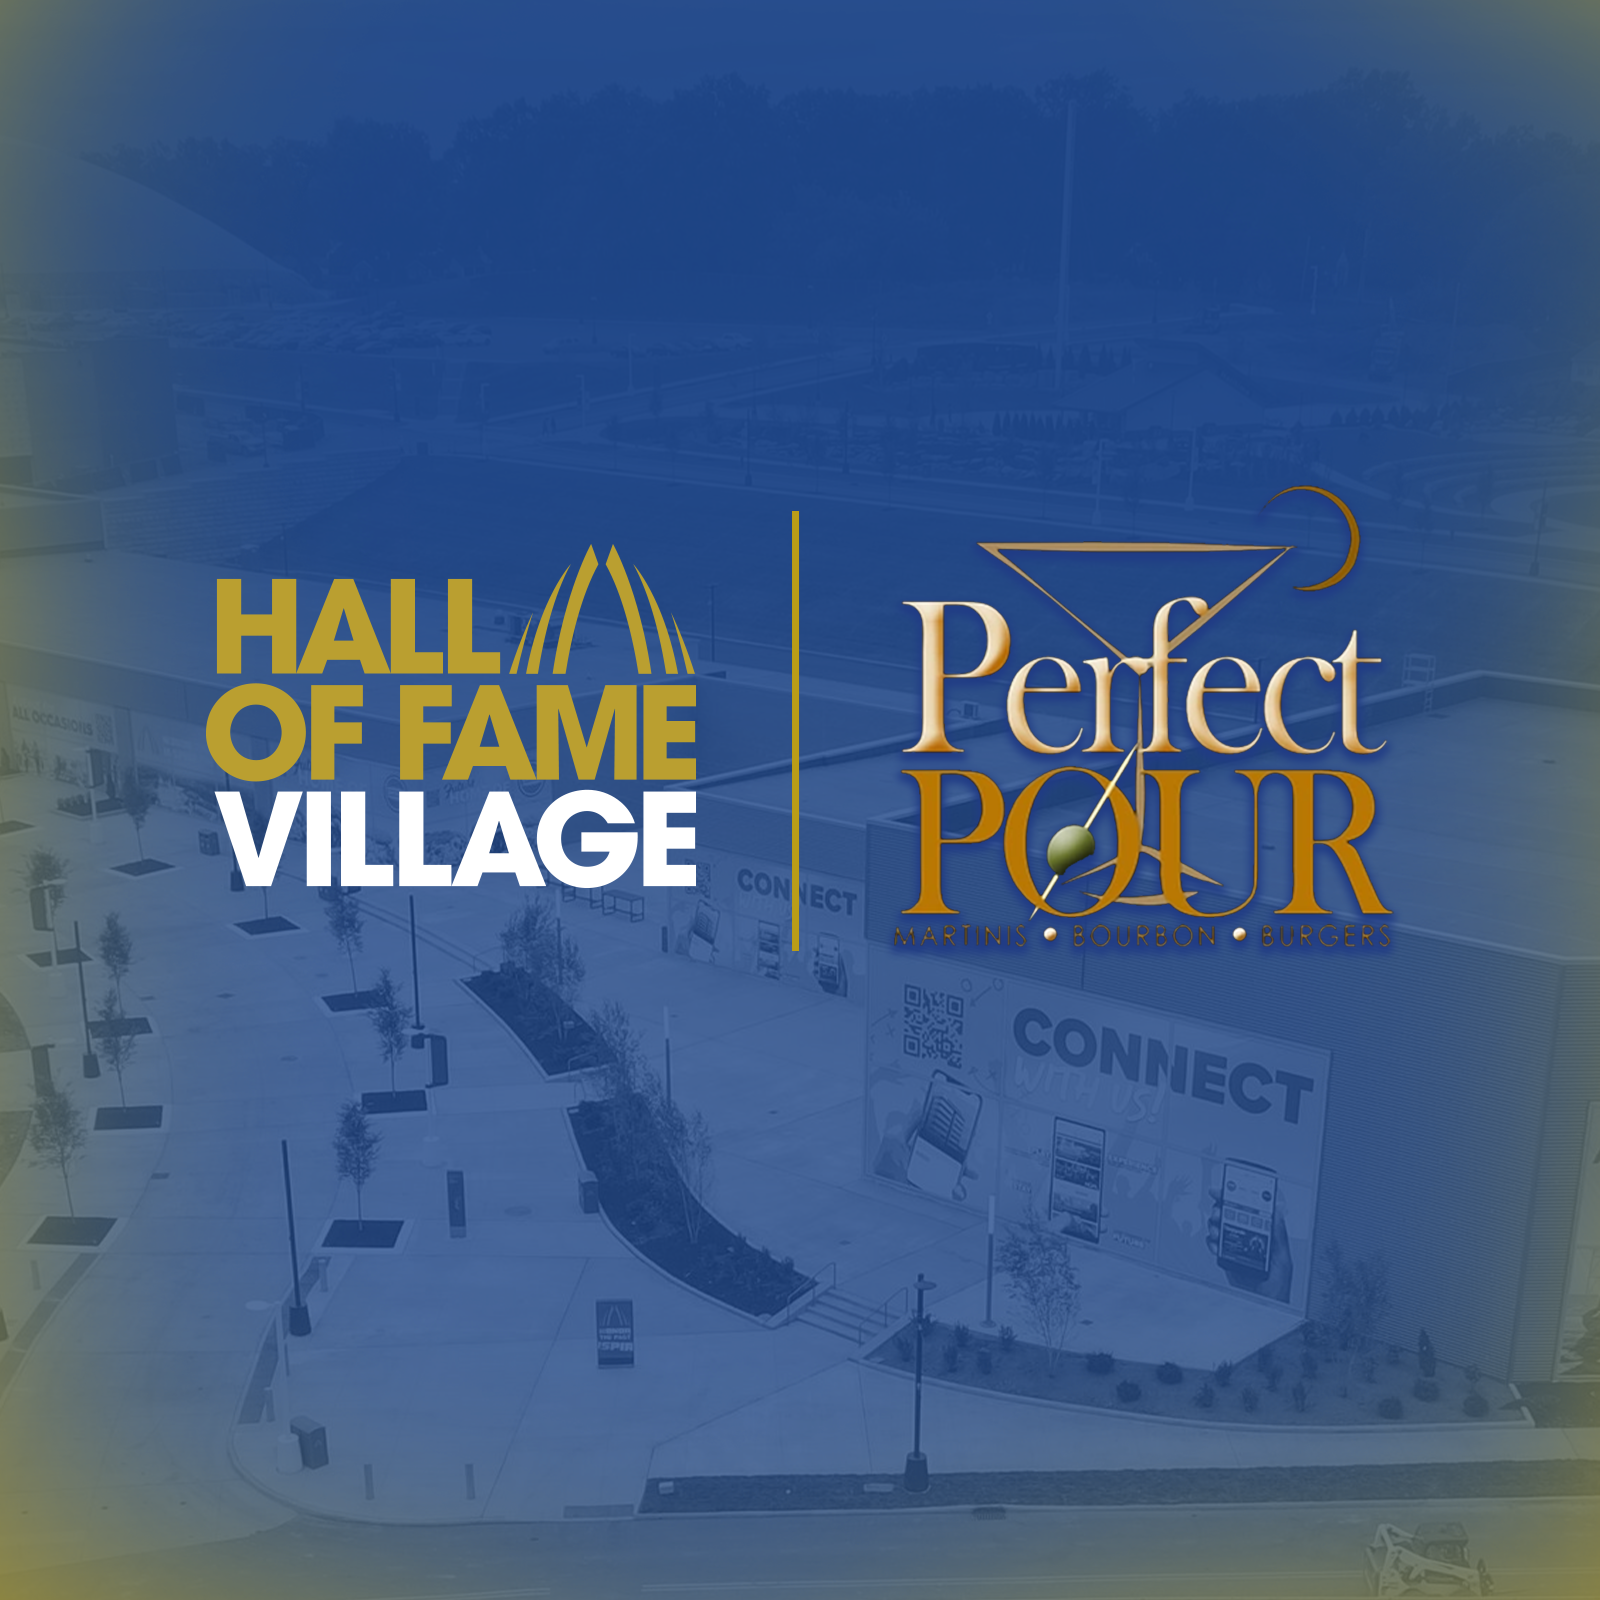 Raise a Glass and Savor: Perfect Pour Brings Bourbon Bliss to  Hall of Fame Village